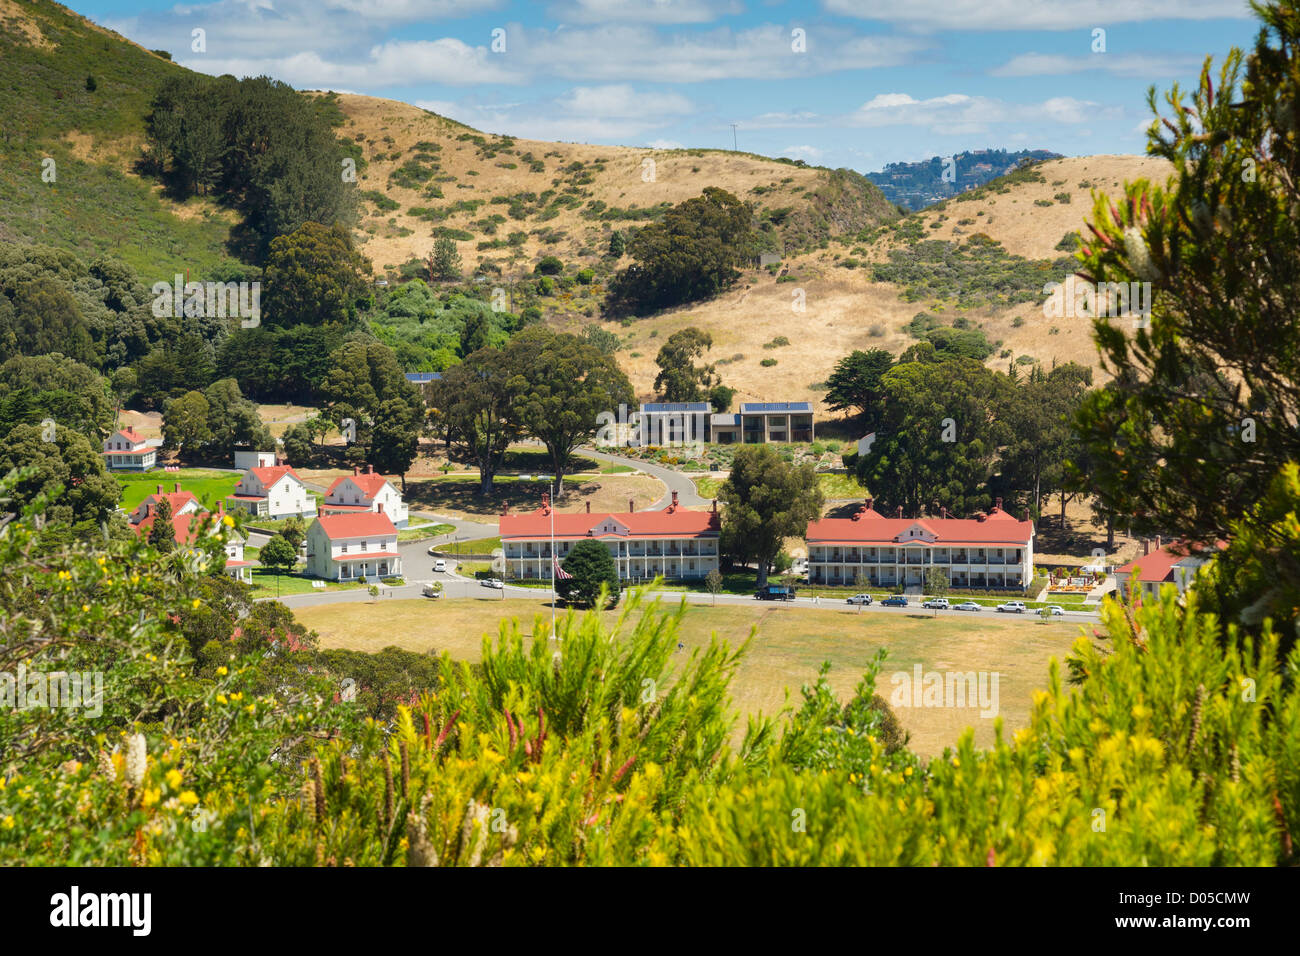 San Francisco - Cavallo Point, former military complex, now residential arts business and tourism. Stock Photo